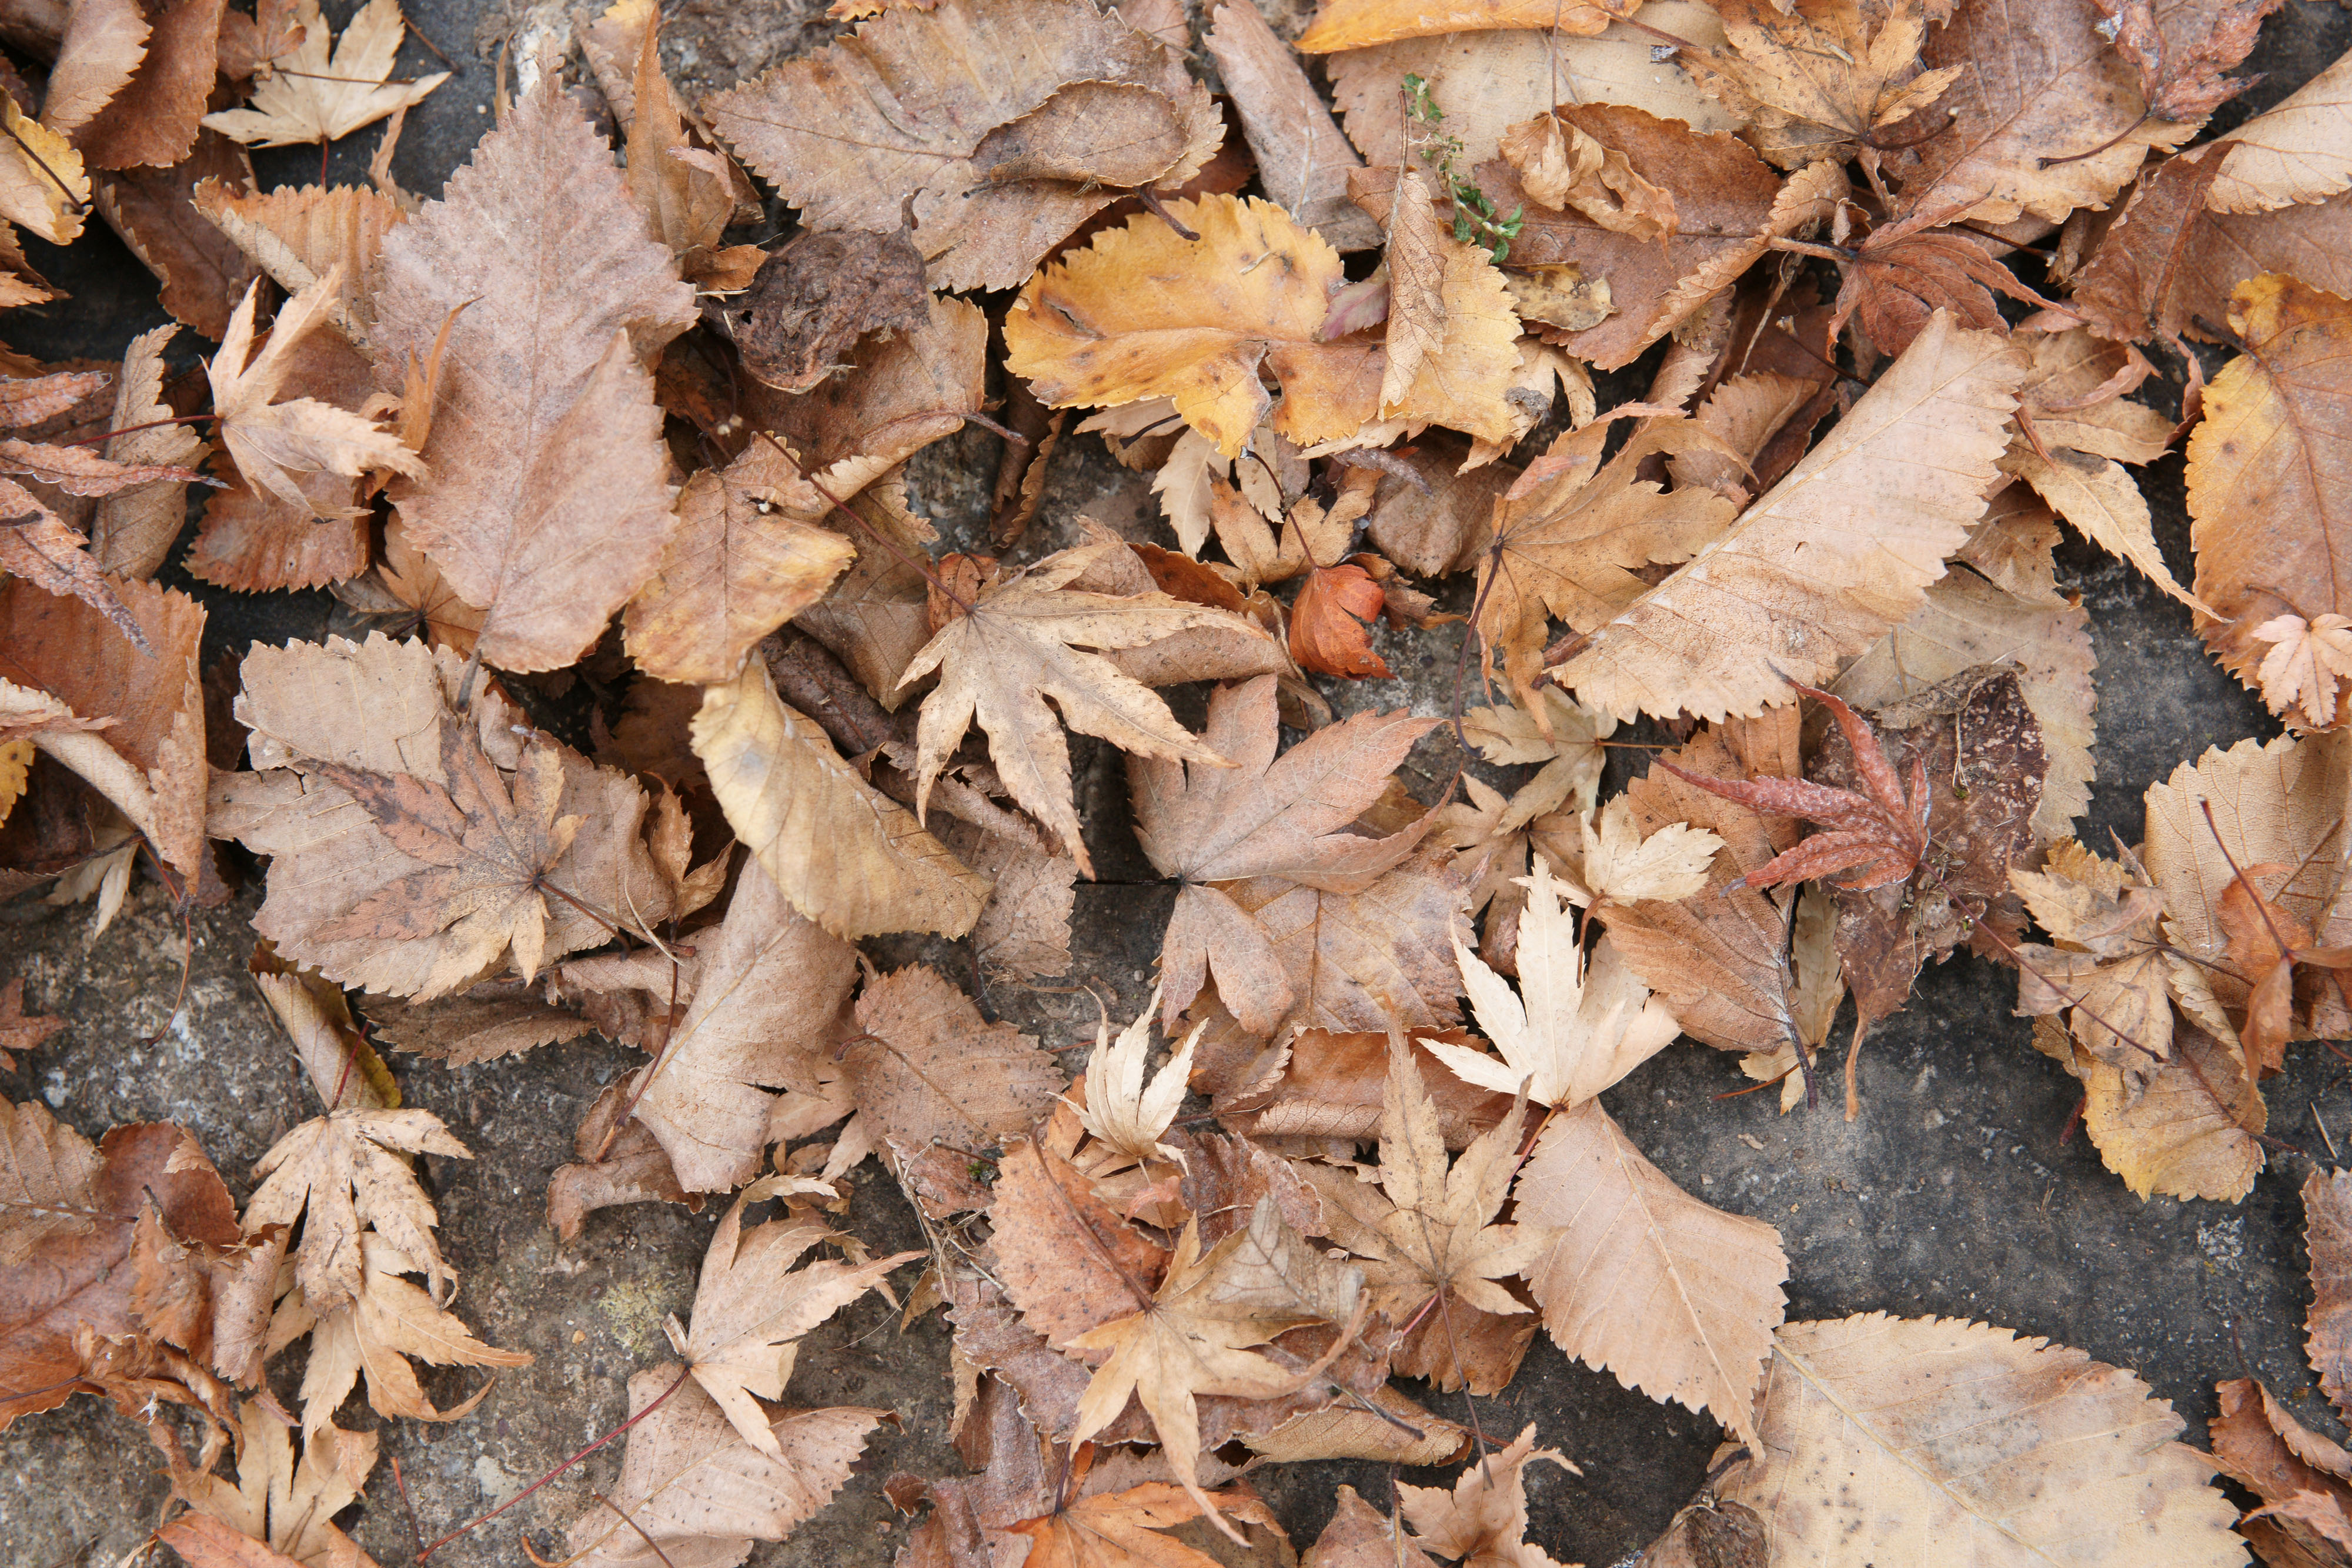 Two background images of brown old dry leaves on the ground